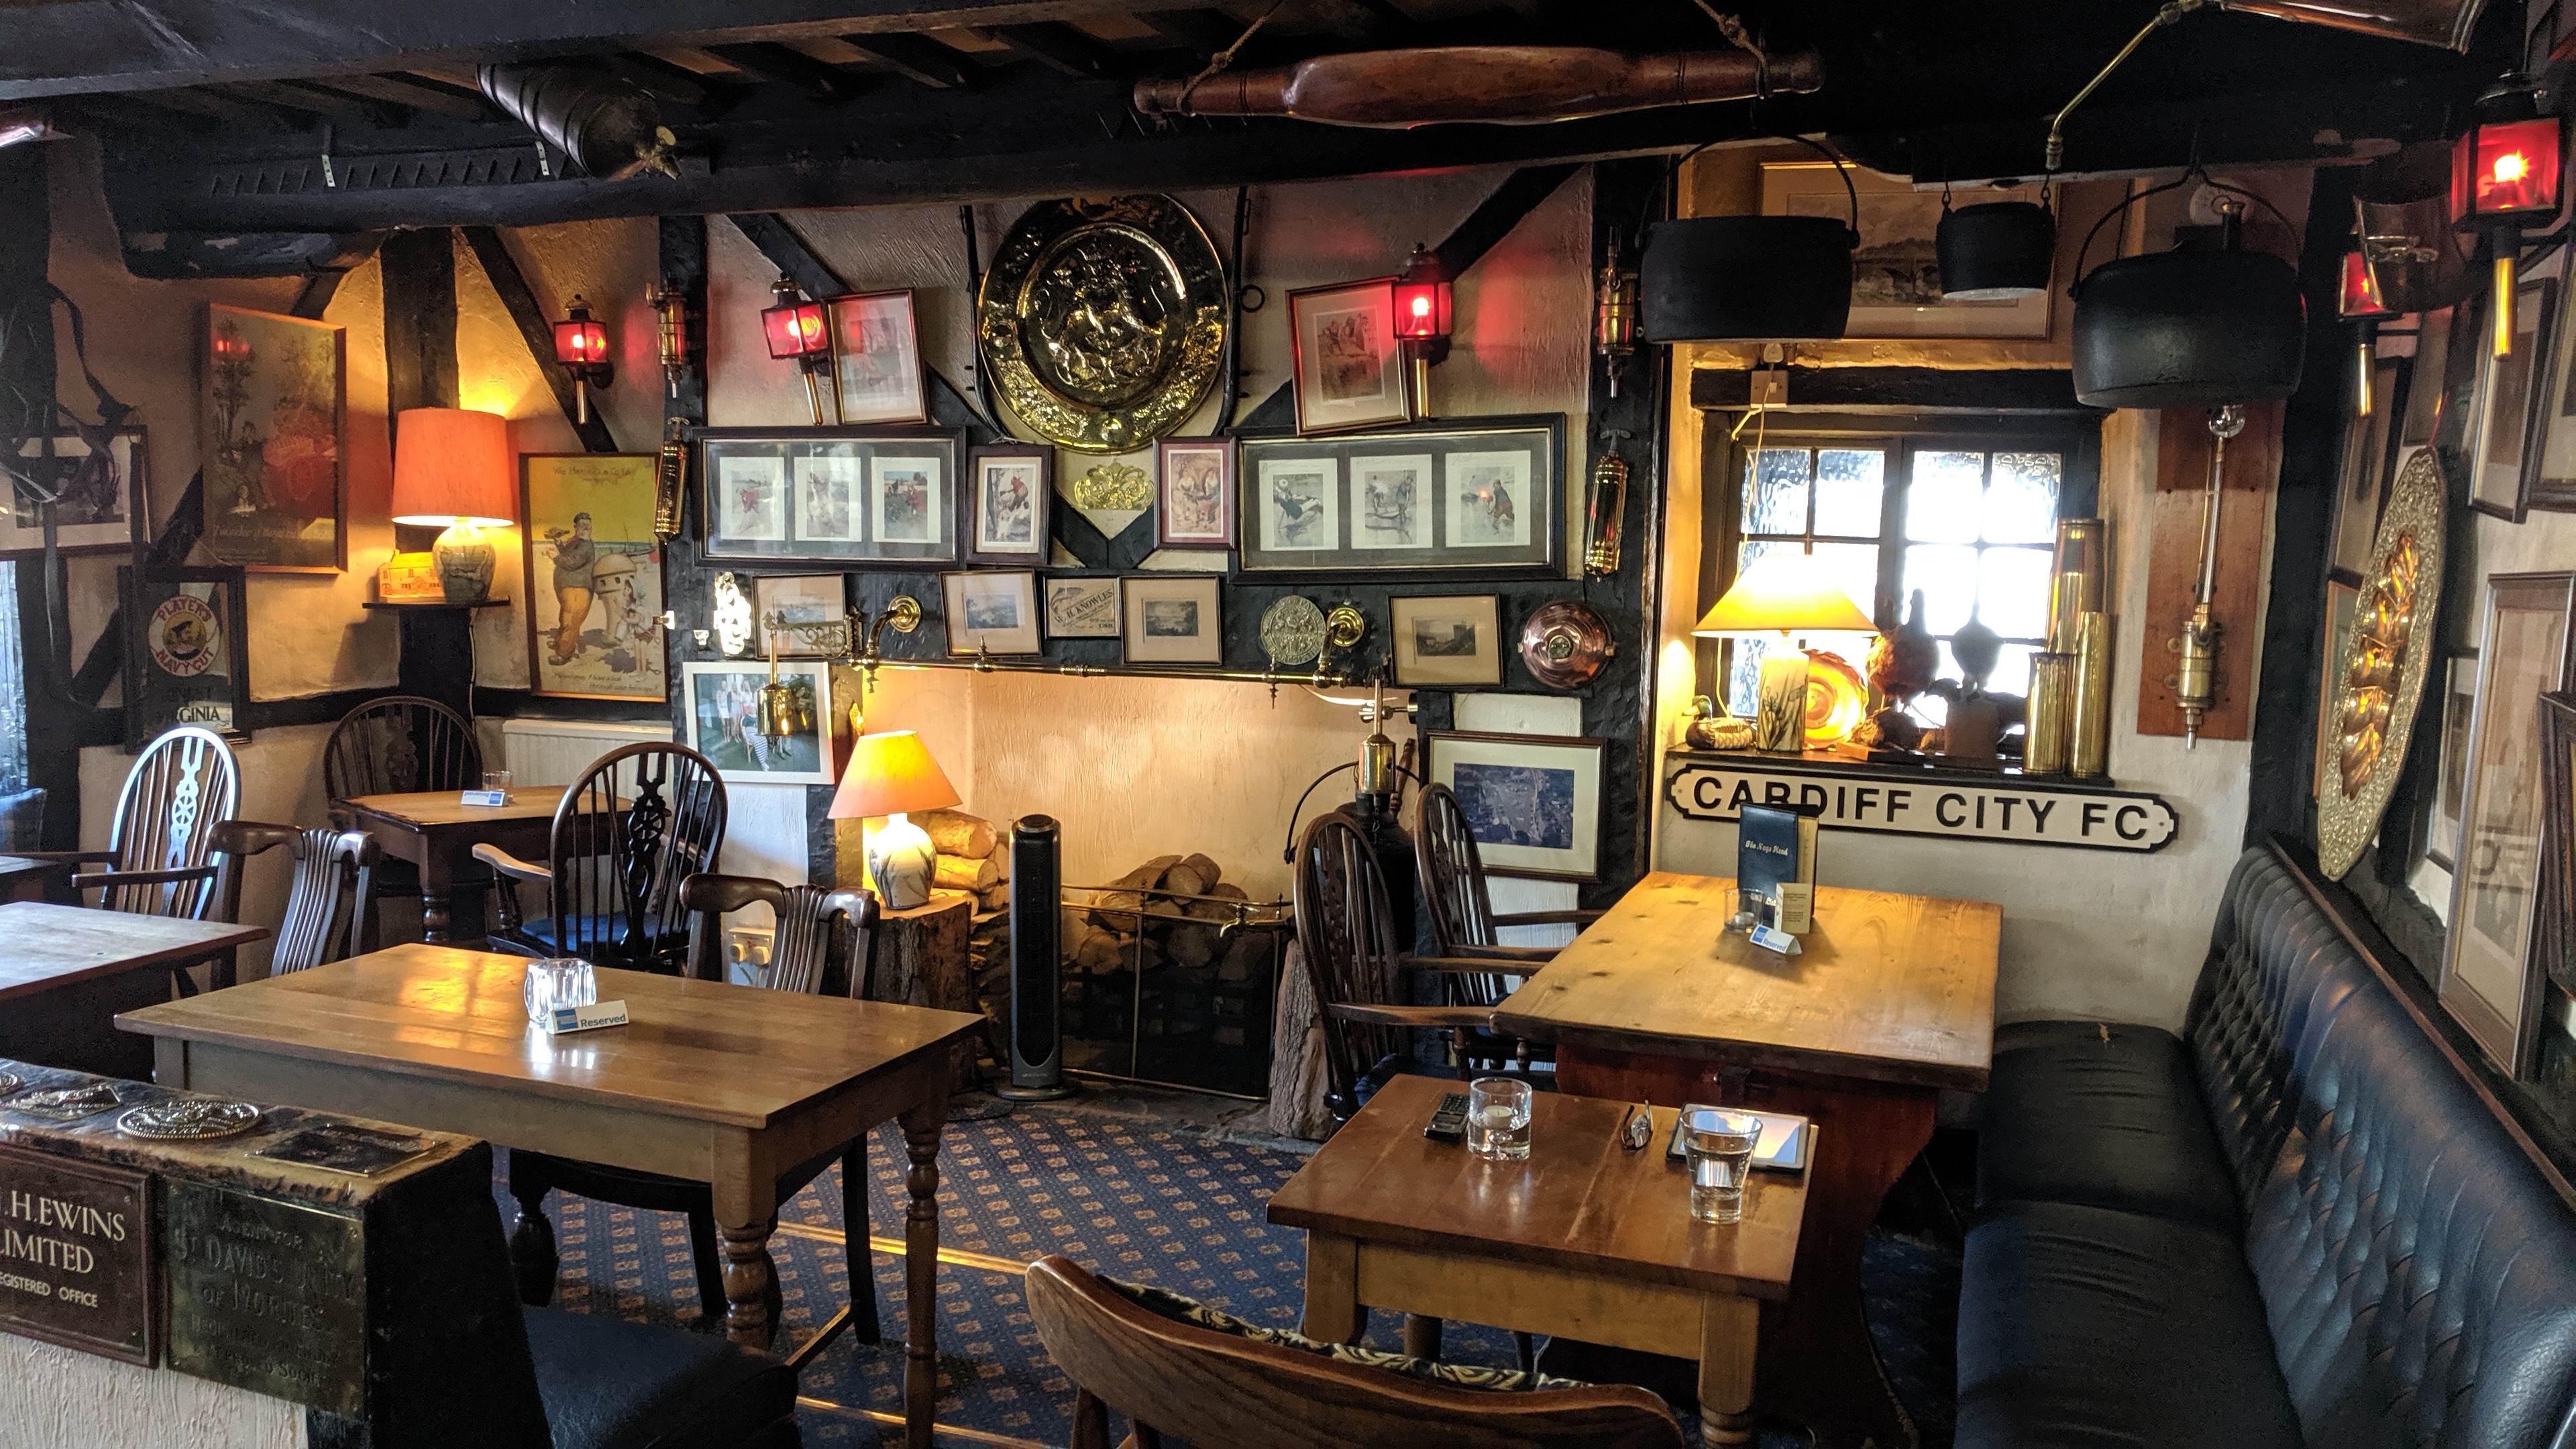 Interior of the Castle Inn, Usk (Wales)